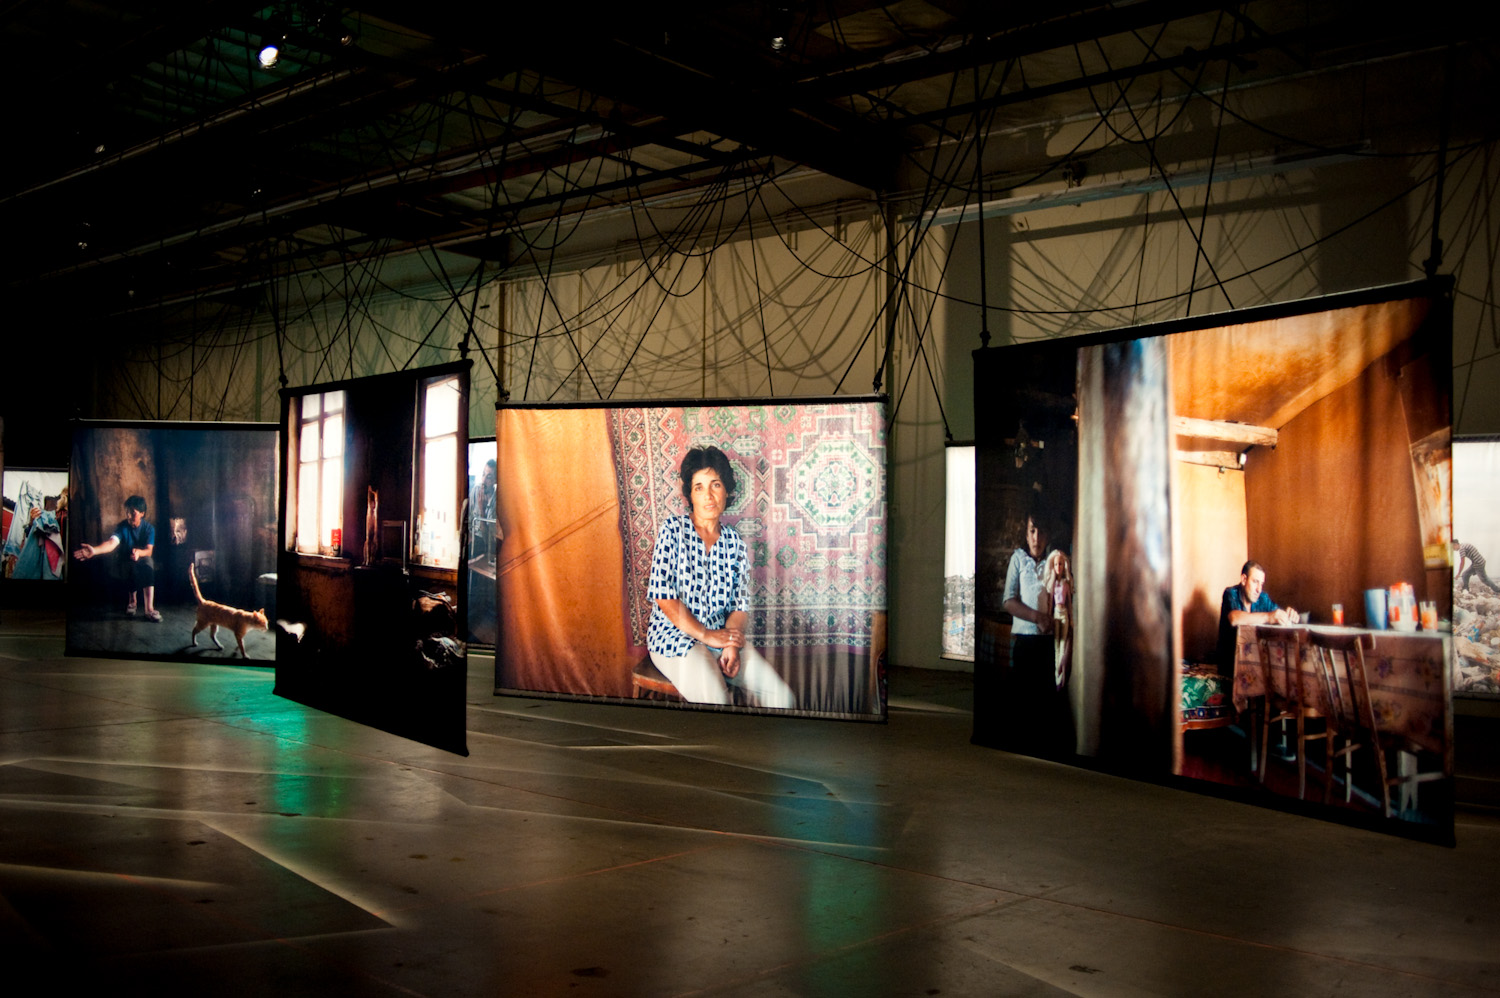  Click  HERE  to listen to Shirley Jahad's KPCC/NPR news story about this exhibit.  